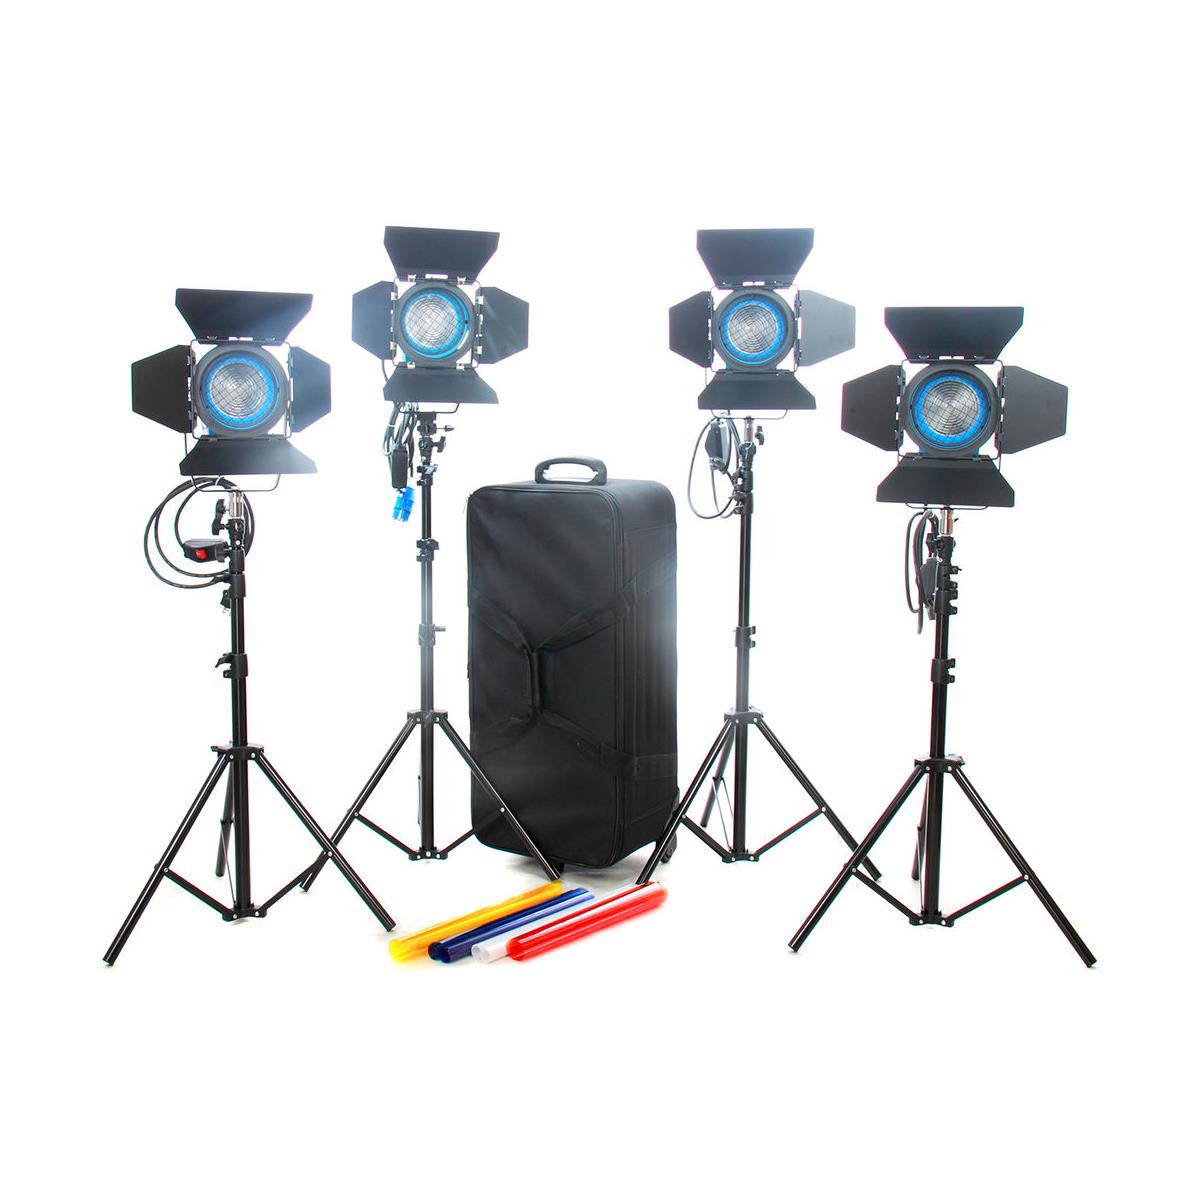 Image of Came-TV 4 x 650W Fresnel Tungsten Continuous Video Lights